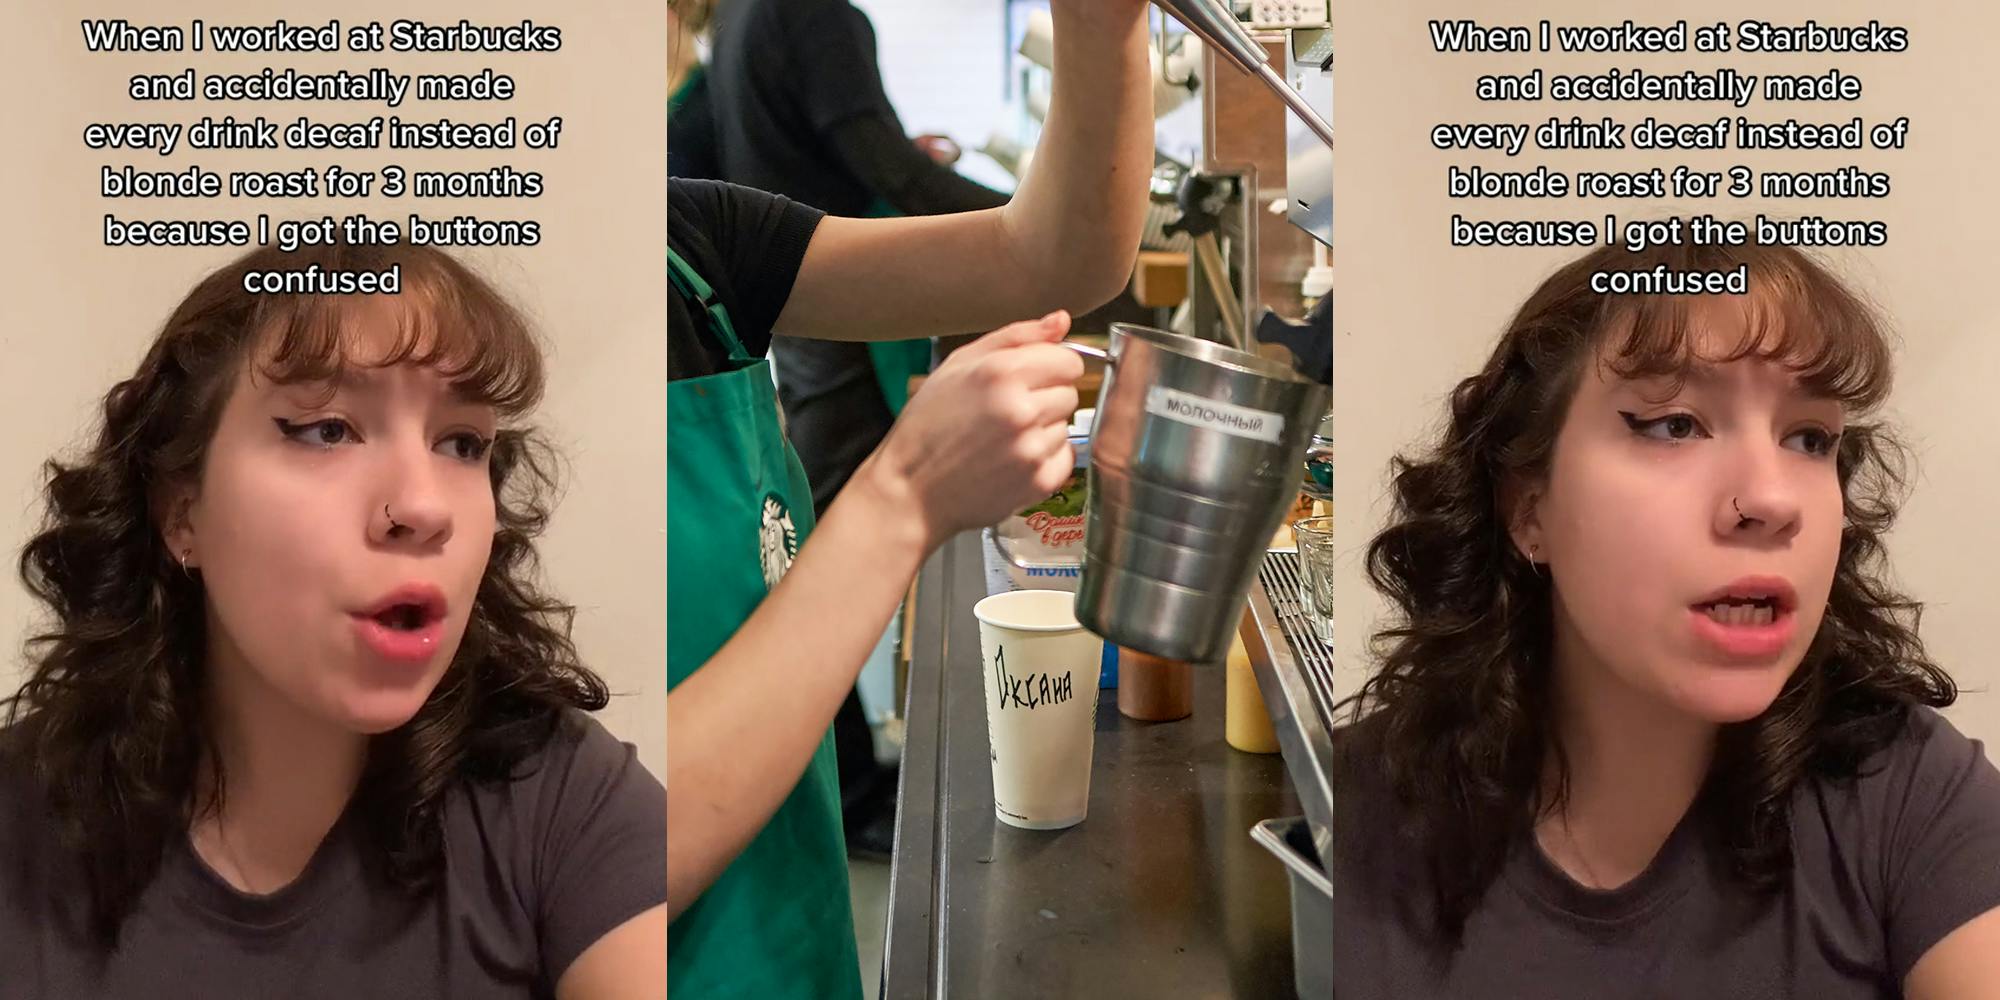 Starbucks employee speaking caption "When I worked at Starbucks and accidentally made every drink decaf instead of blonde roast for 3 months because I got the buttons confused" (l) Starbucks barista making drink (c) Starbucks employee speaking caption "When I worked at Starbucks and accidentally made every drink decaf instead of blonde roast for 3 months because I got the buttons confused" (r)